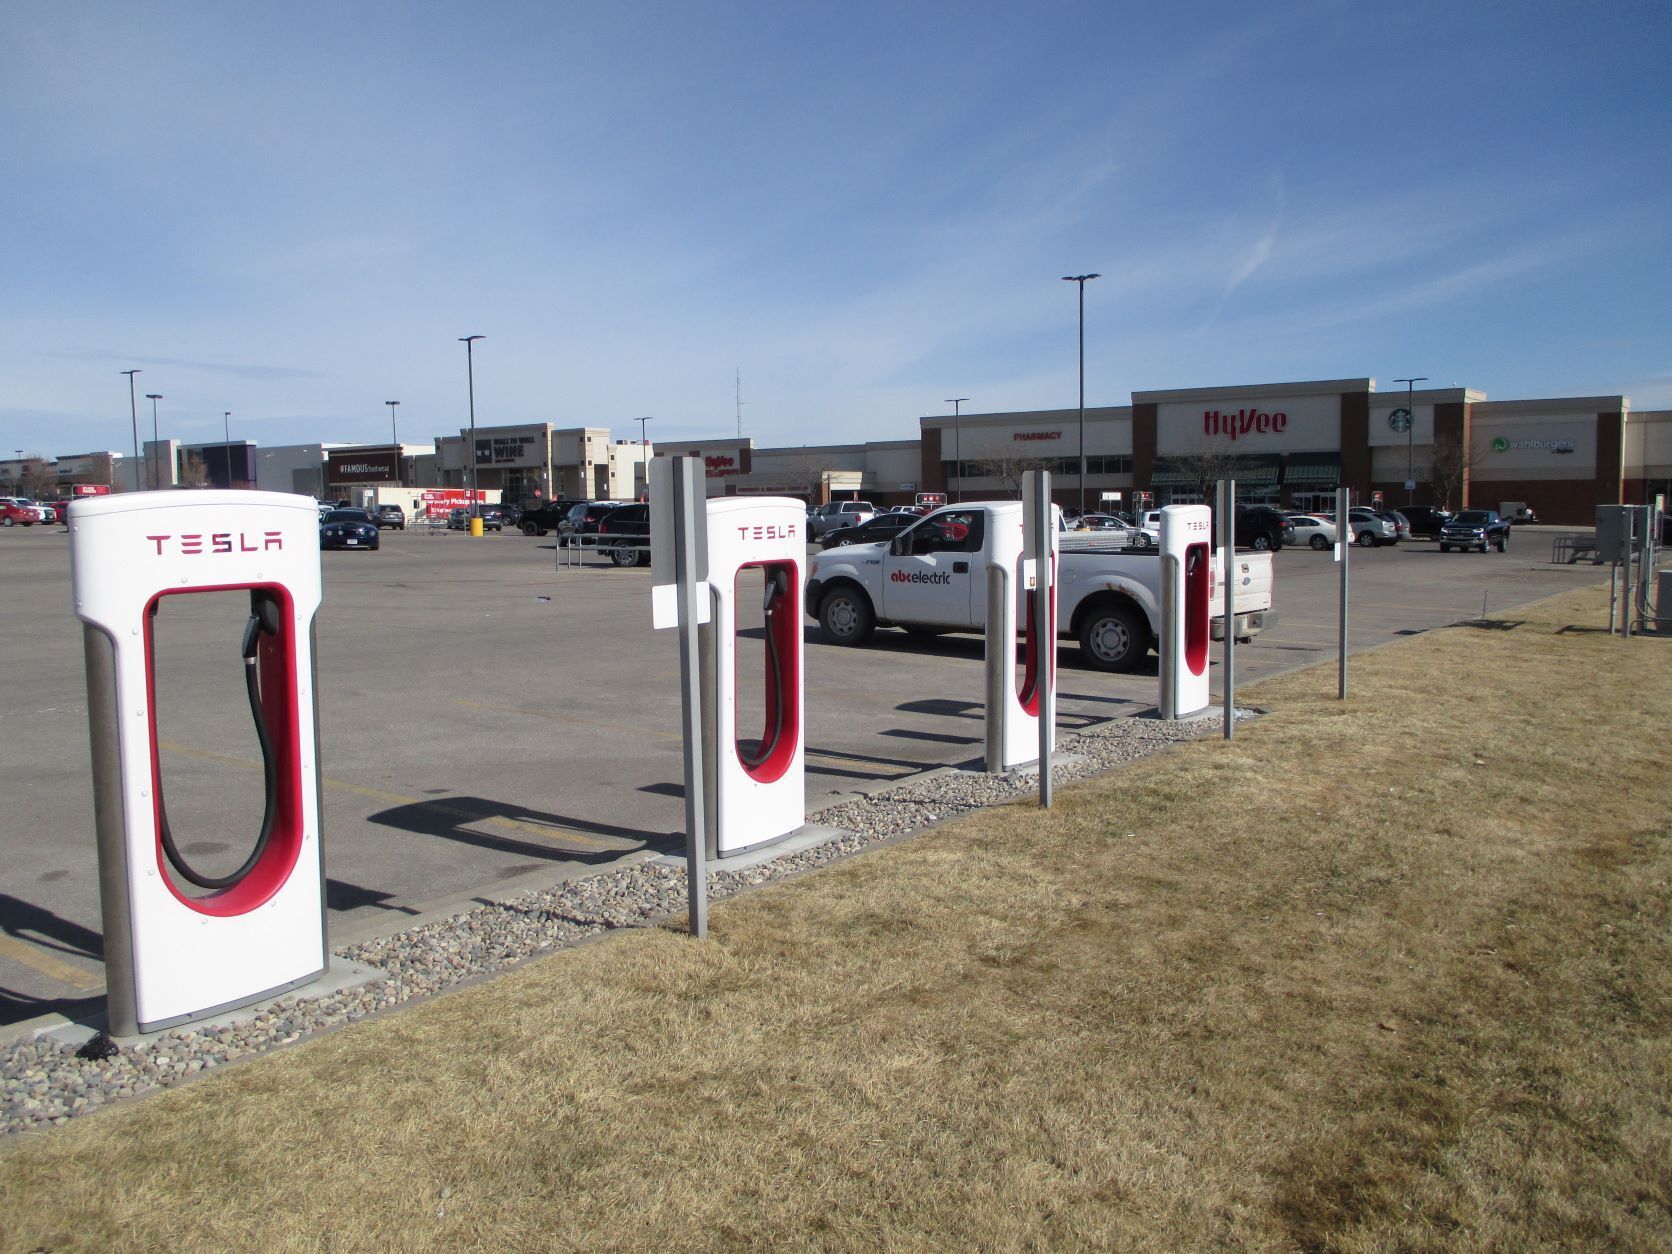 An area with a new Tesla electric charger installation